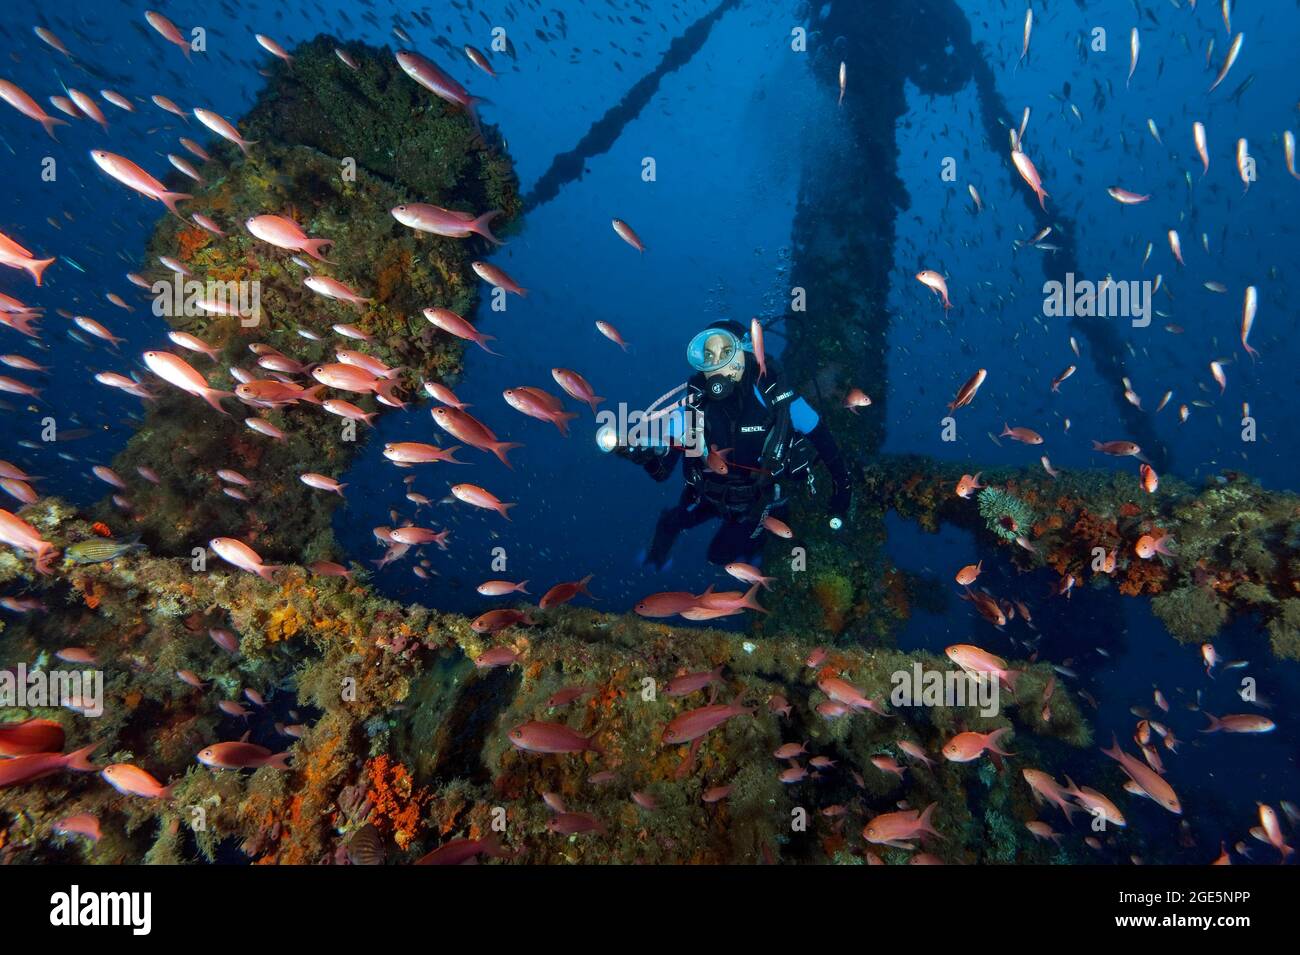 Diver looking at Mediterranean Basselet (Anthias anthias) over shipwreck, Mediterranean Sea, Trapani, Sicily, Italy Stock Photo